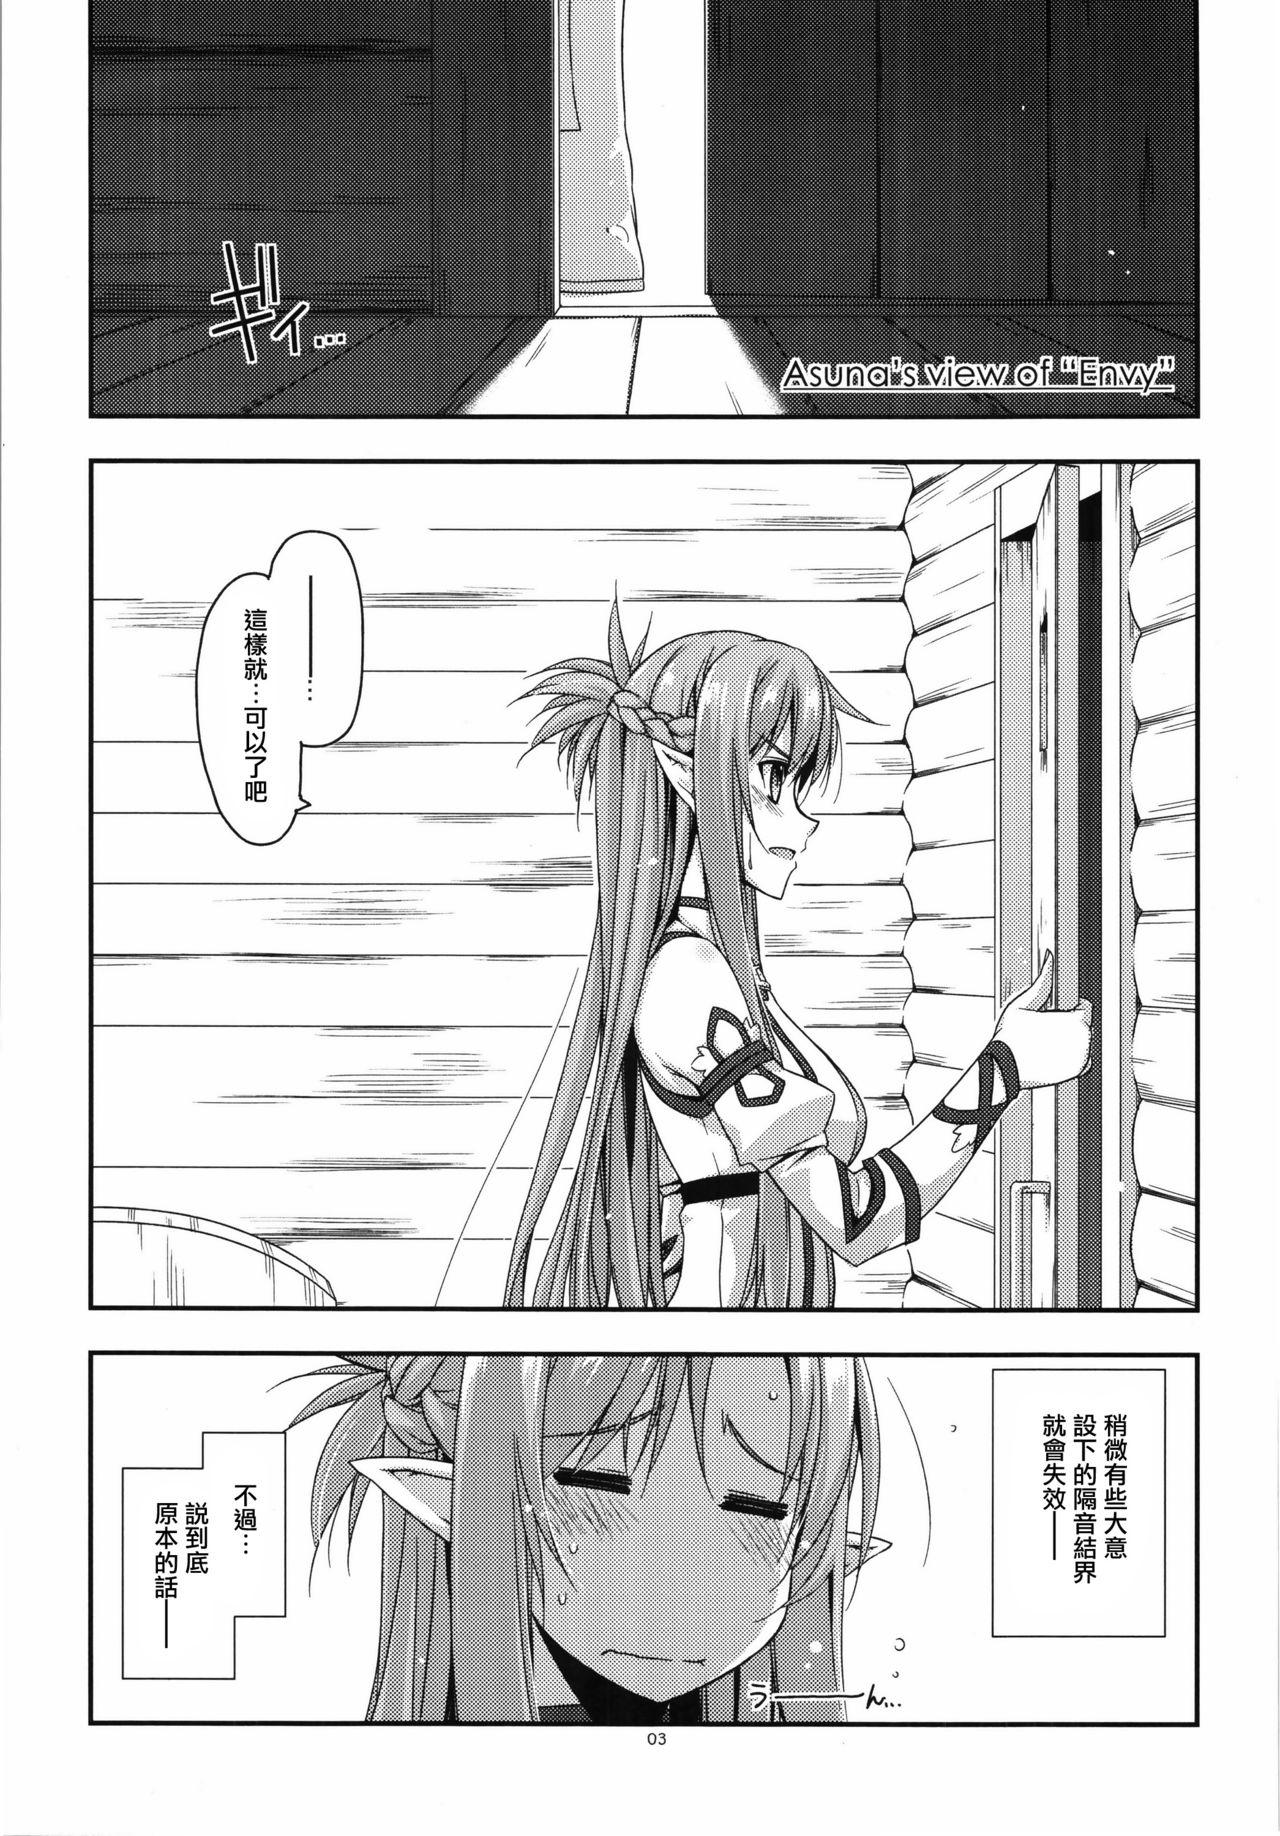 Culona Extra38 - Sword art online Sex Pussy - Page 3